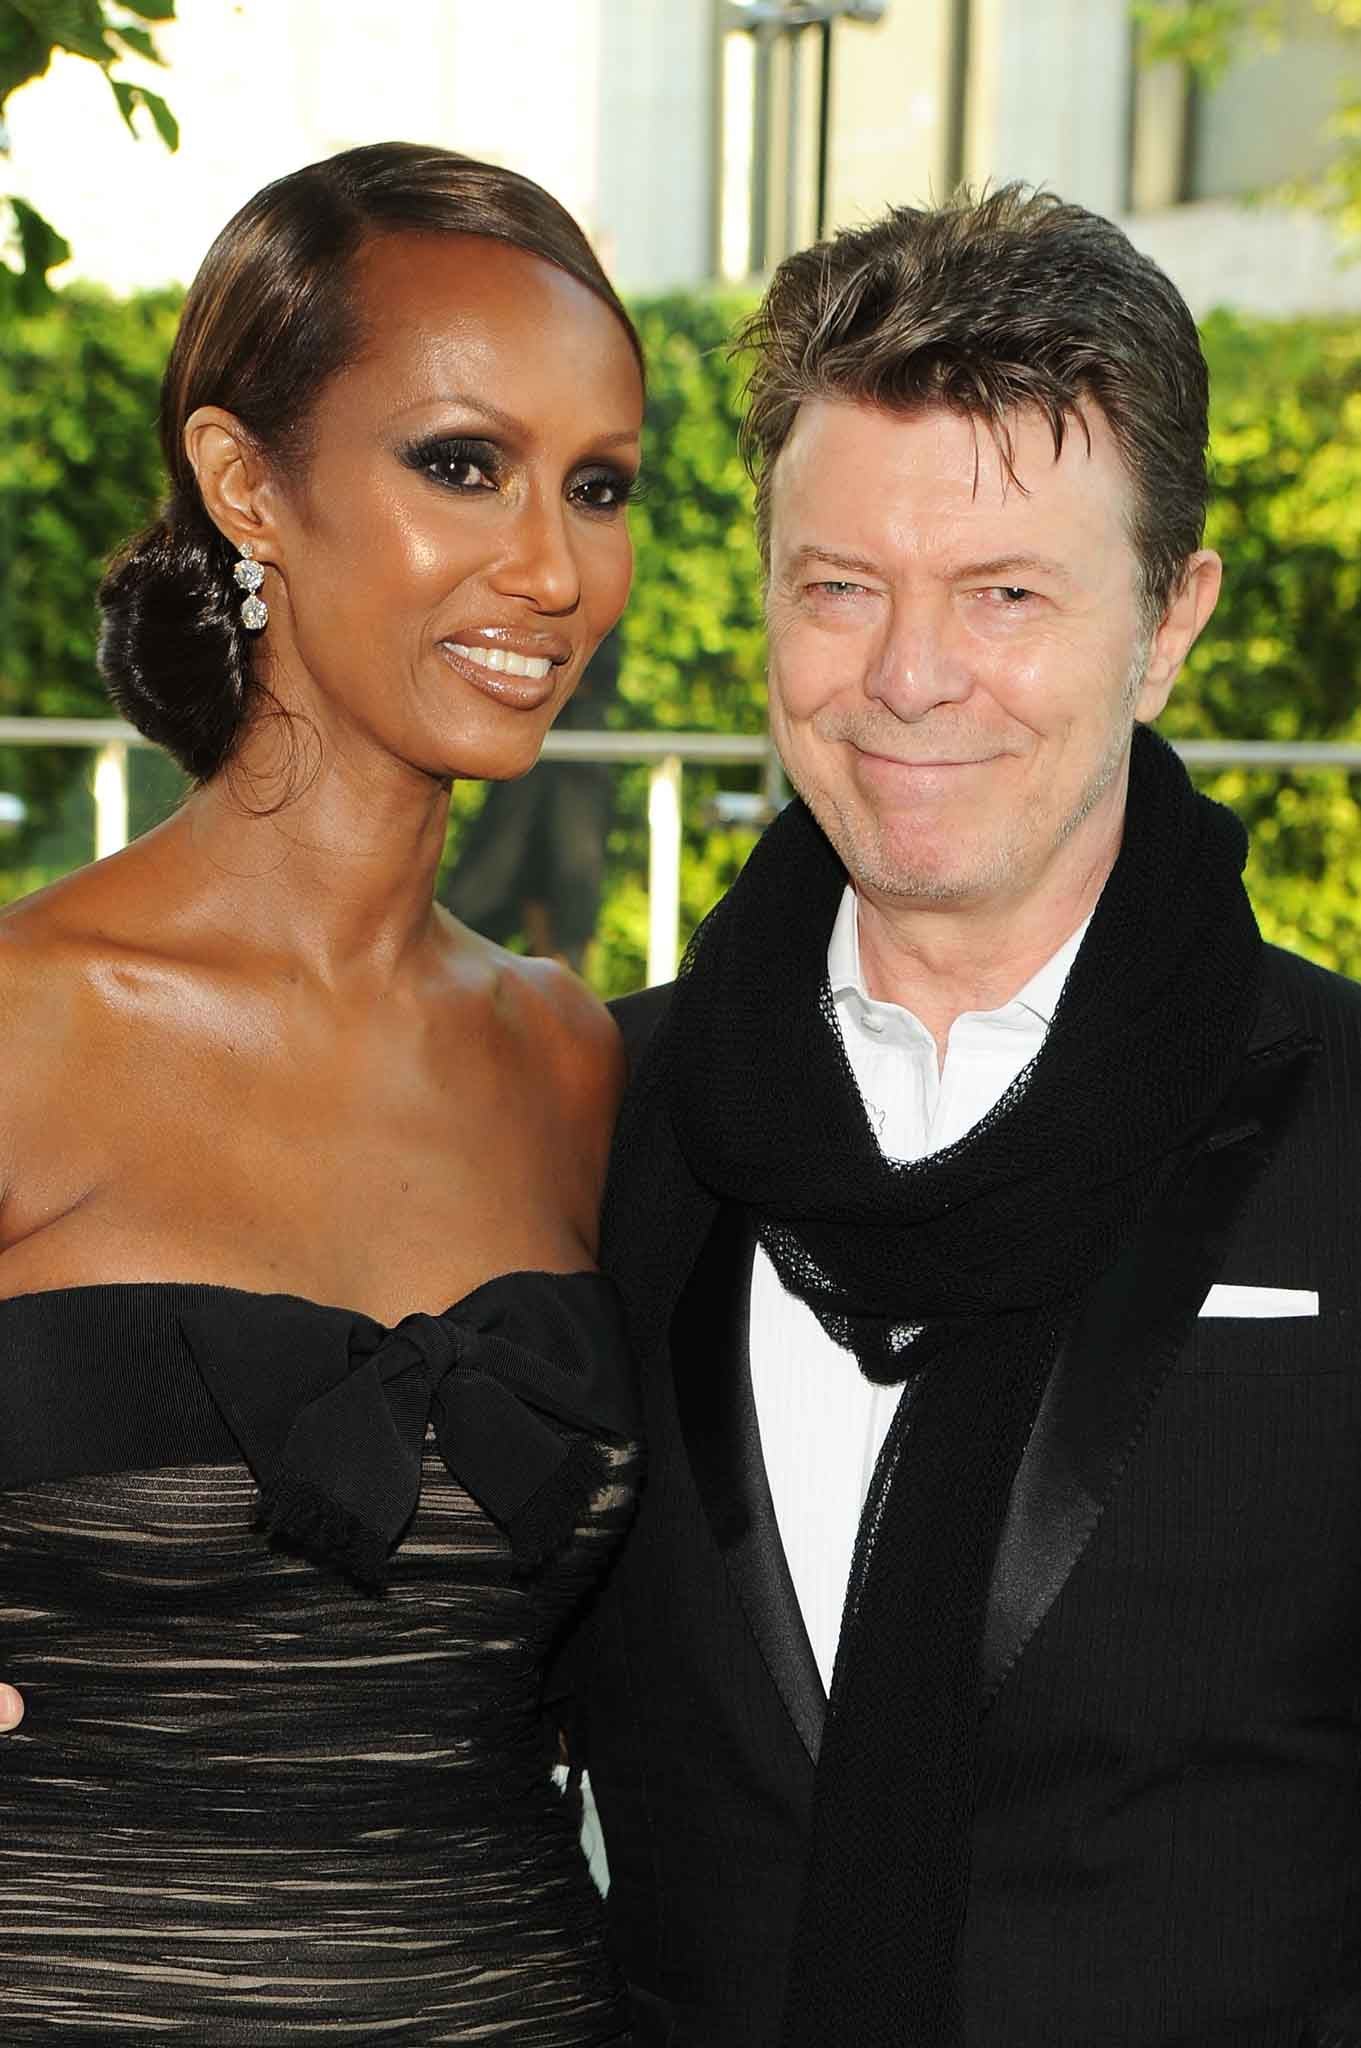 Iman and David Bowie in 2010